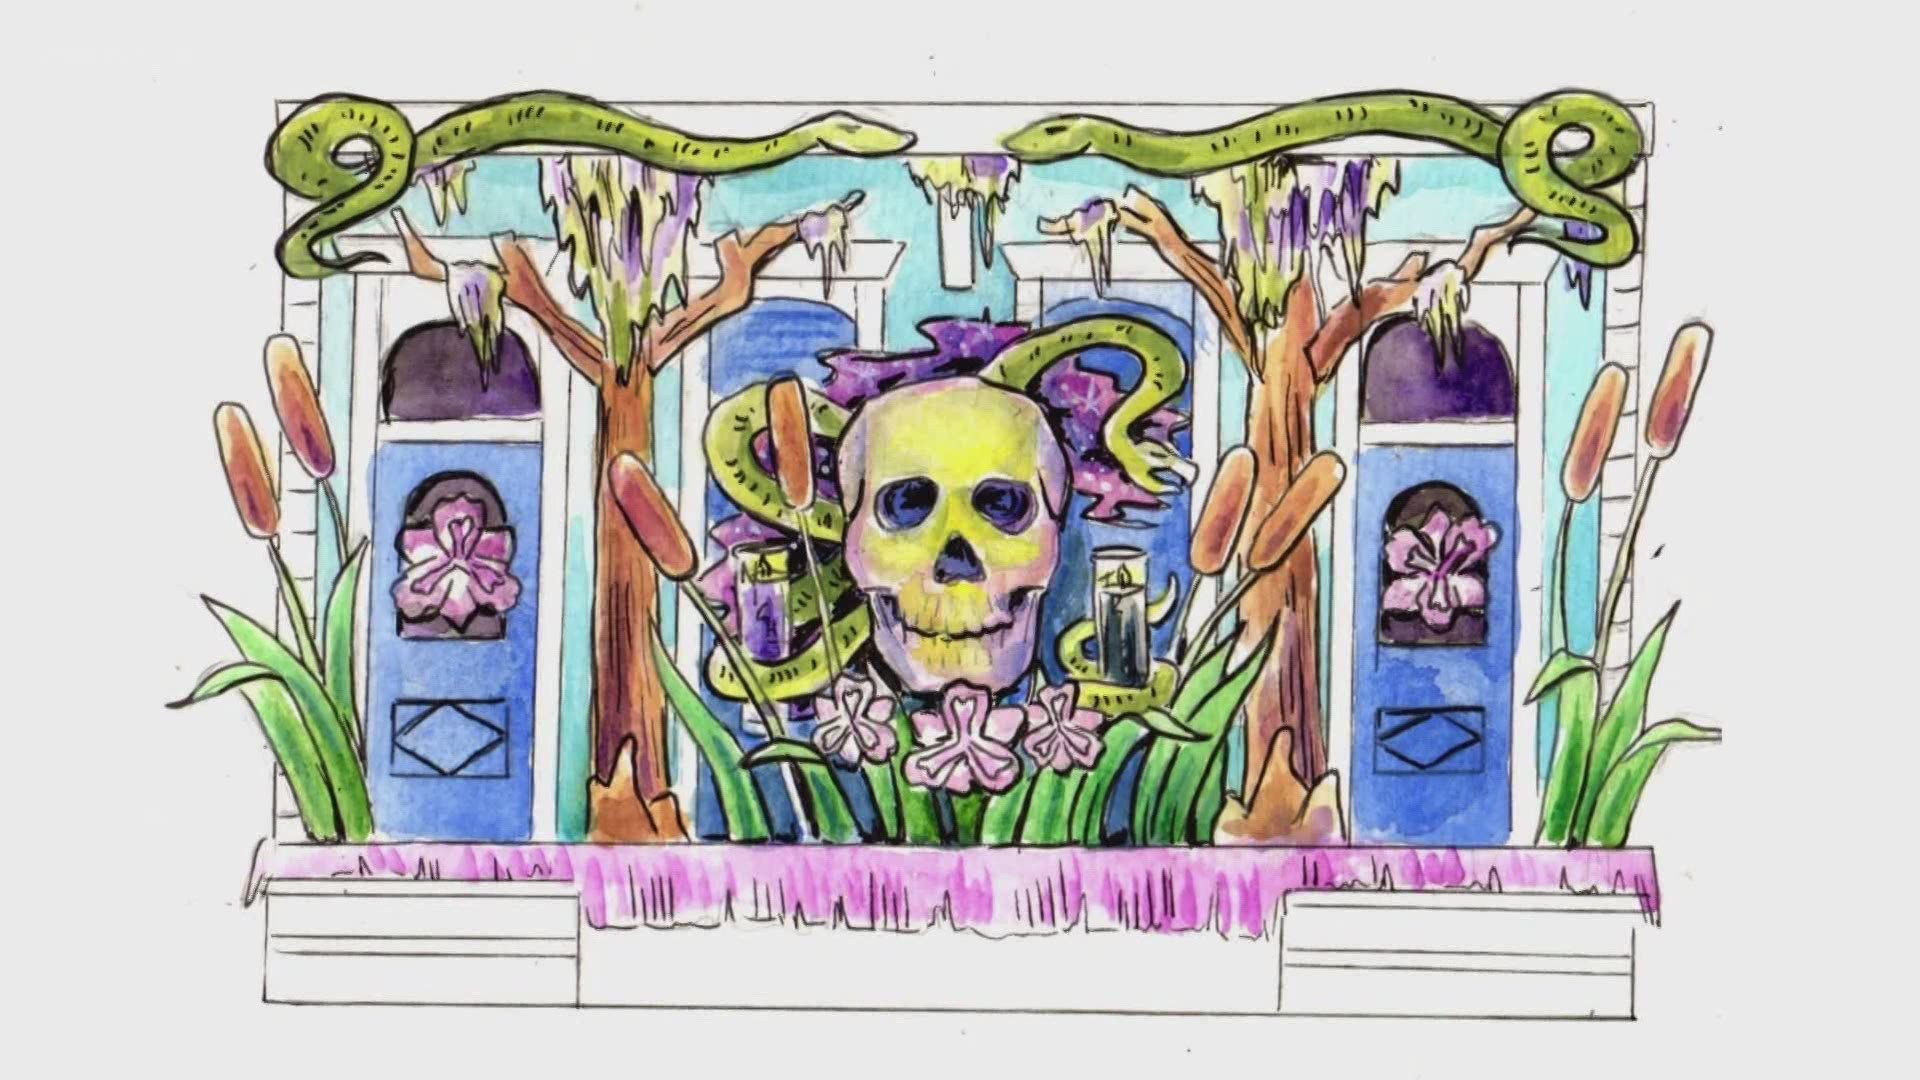 A campaign by the Krewe of Red Beans seeks donations to help local Mardi Gras artists by hiring them to design "house floats" for Carnival 2021 with no parades.